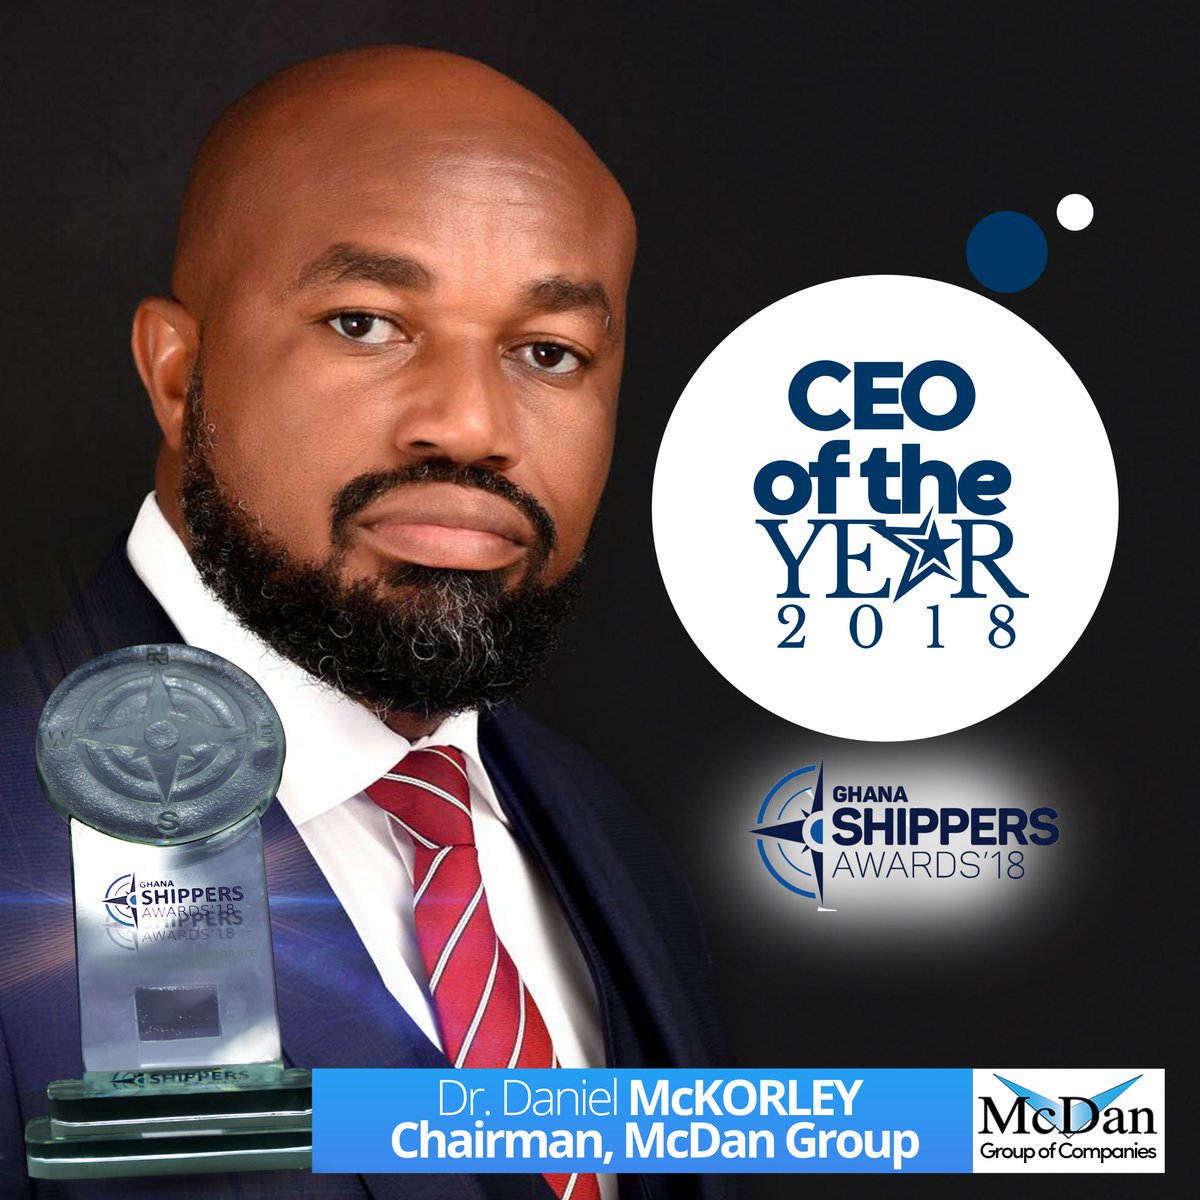 From McDan Shipping staff to our CEO (Dr. Daniel McKorley) , we congratulate you on winning this honorary award... #ghanianceo
#ghana #africa #africanceo #ceo #ceolife #ceomillionaires #mcdangroup #mcdanshipping